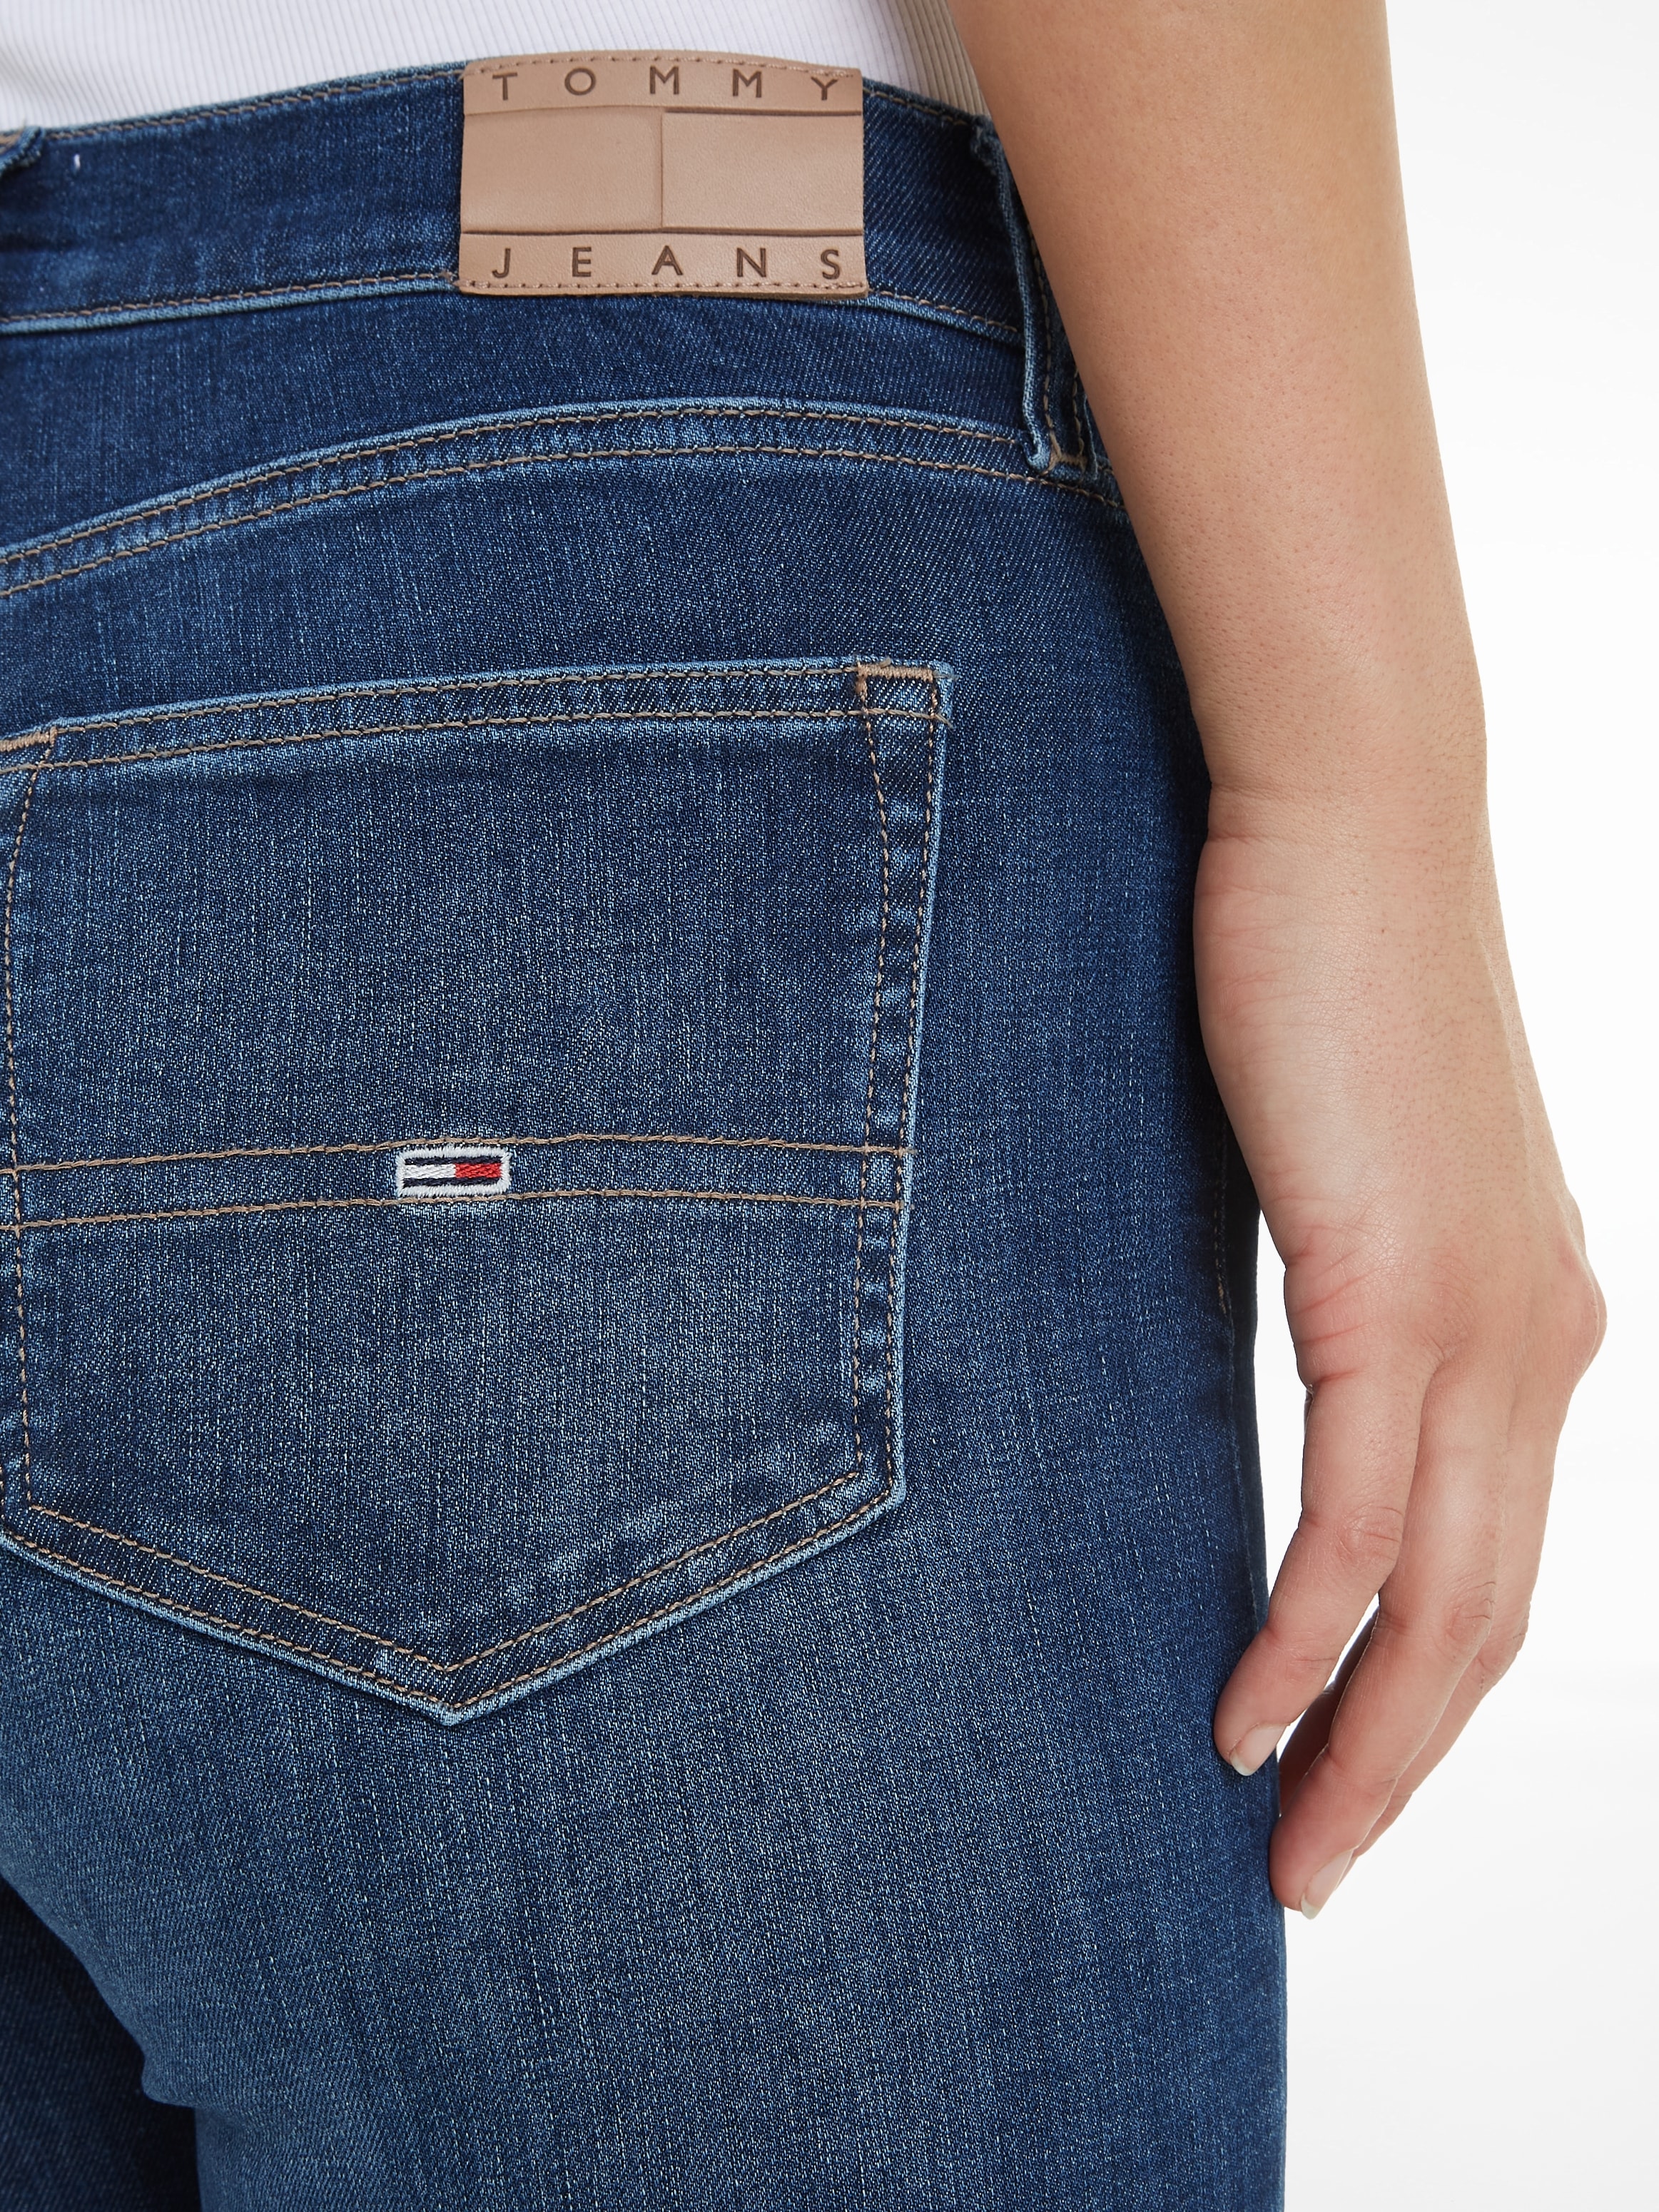 ♕ Jeans mit Bequeme Markenlabel Jeans Tommy bei »Sylvia«,